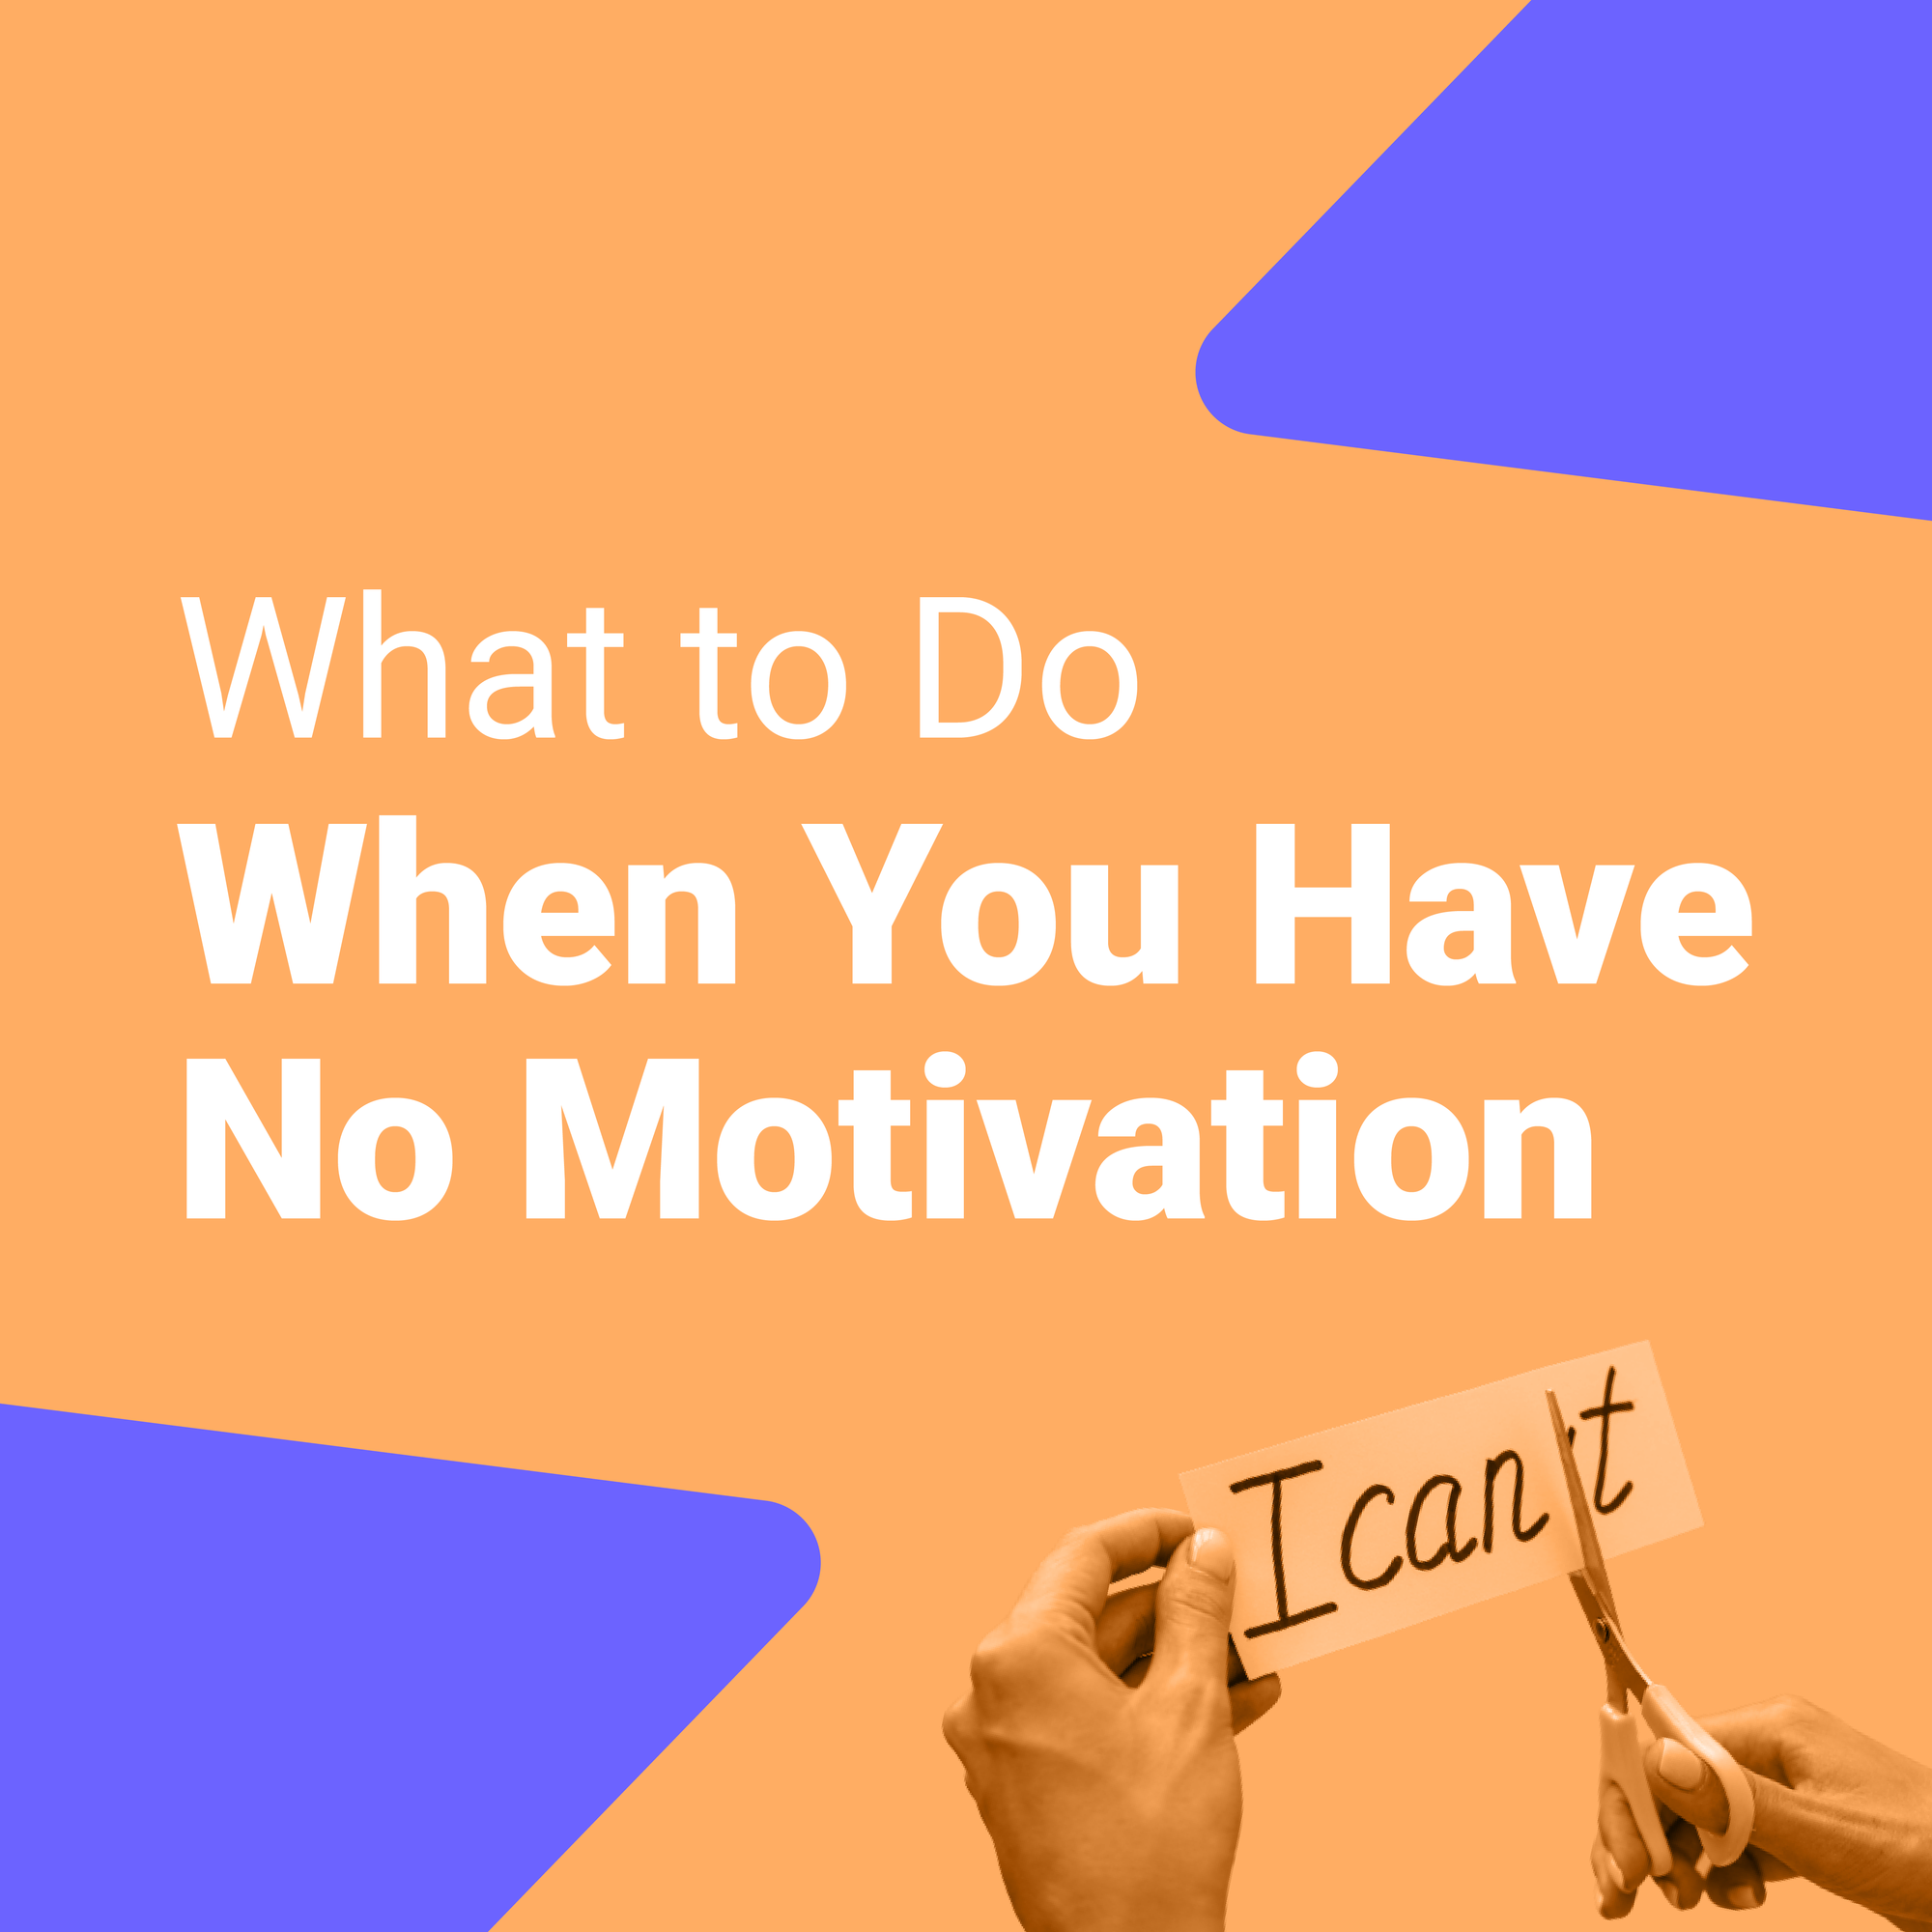 What to Do When You Have No Motivation